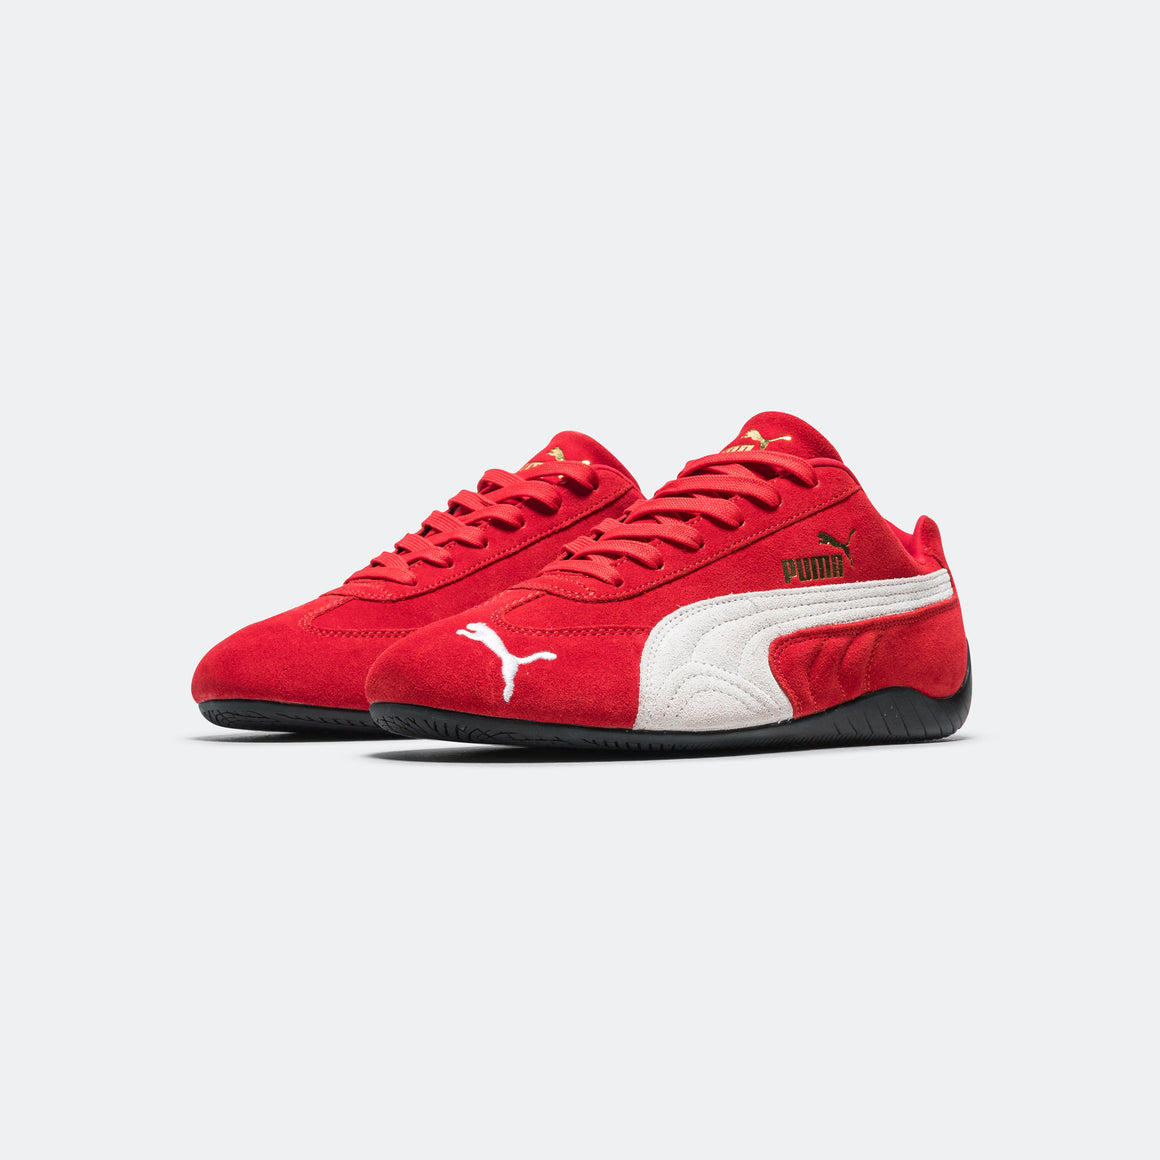 Puma - Speedcat OG - Red/White - UP THERE